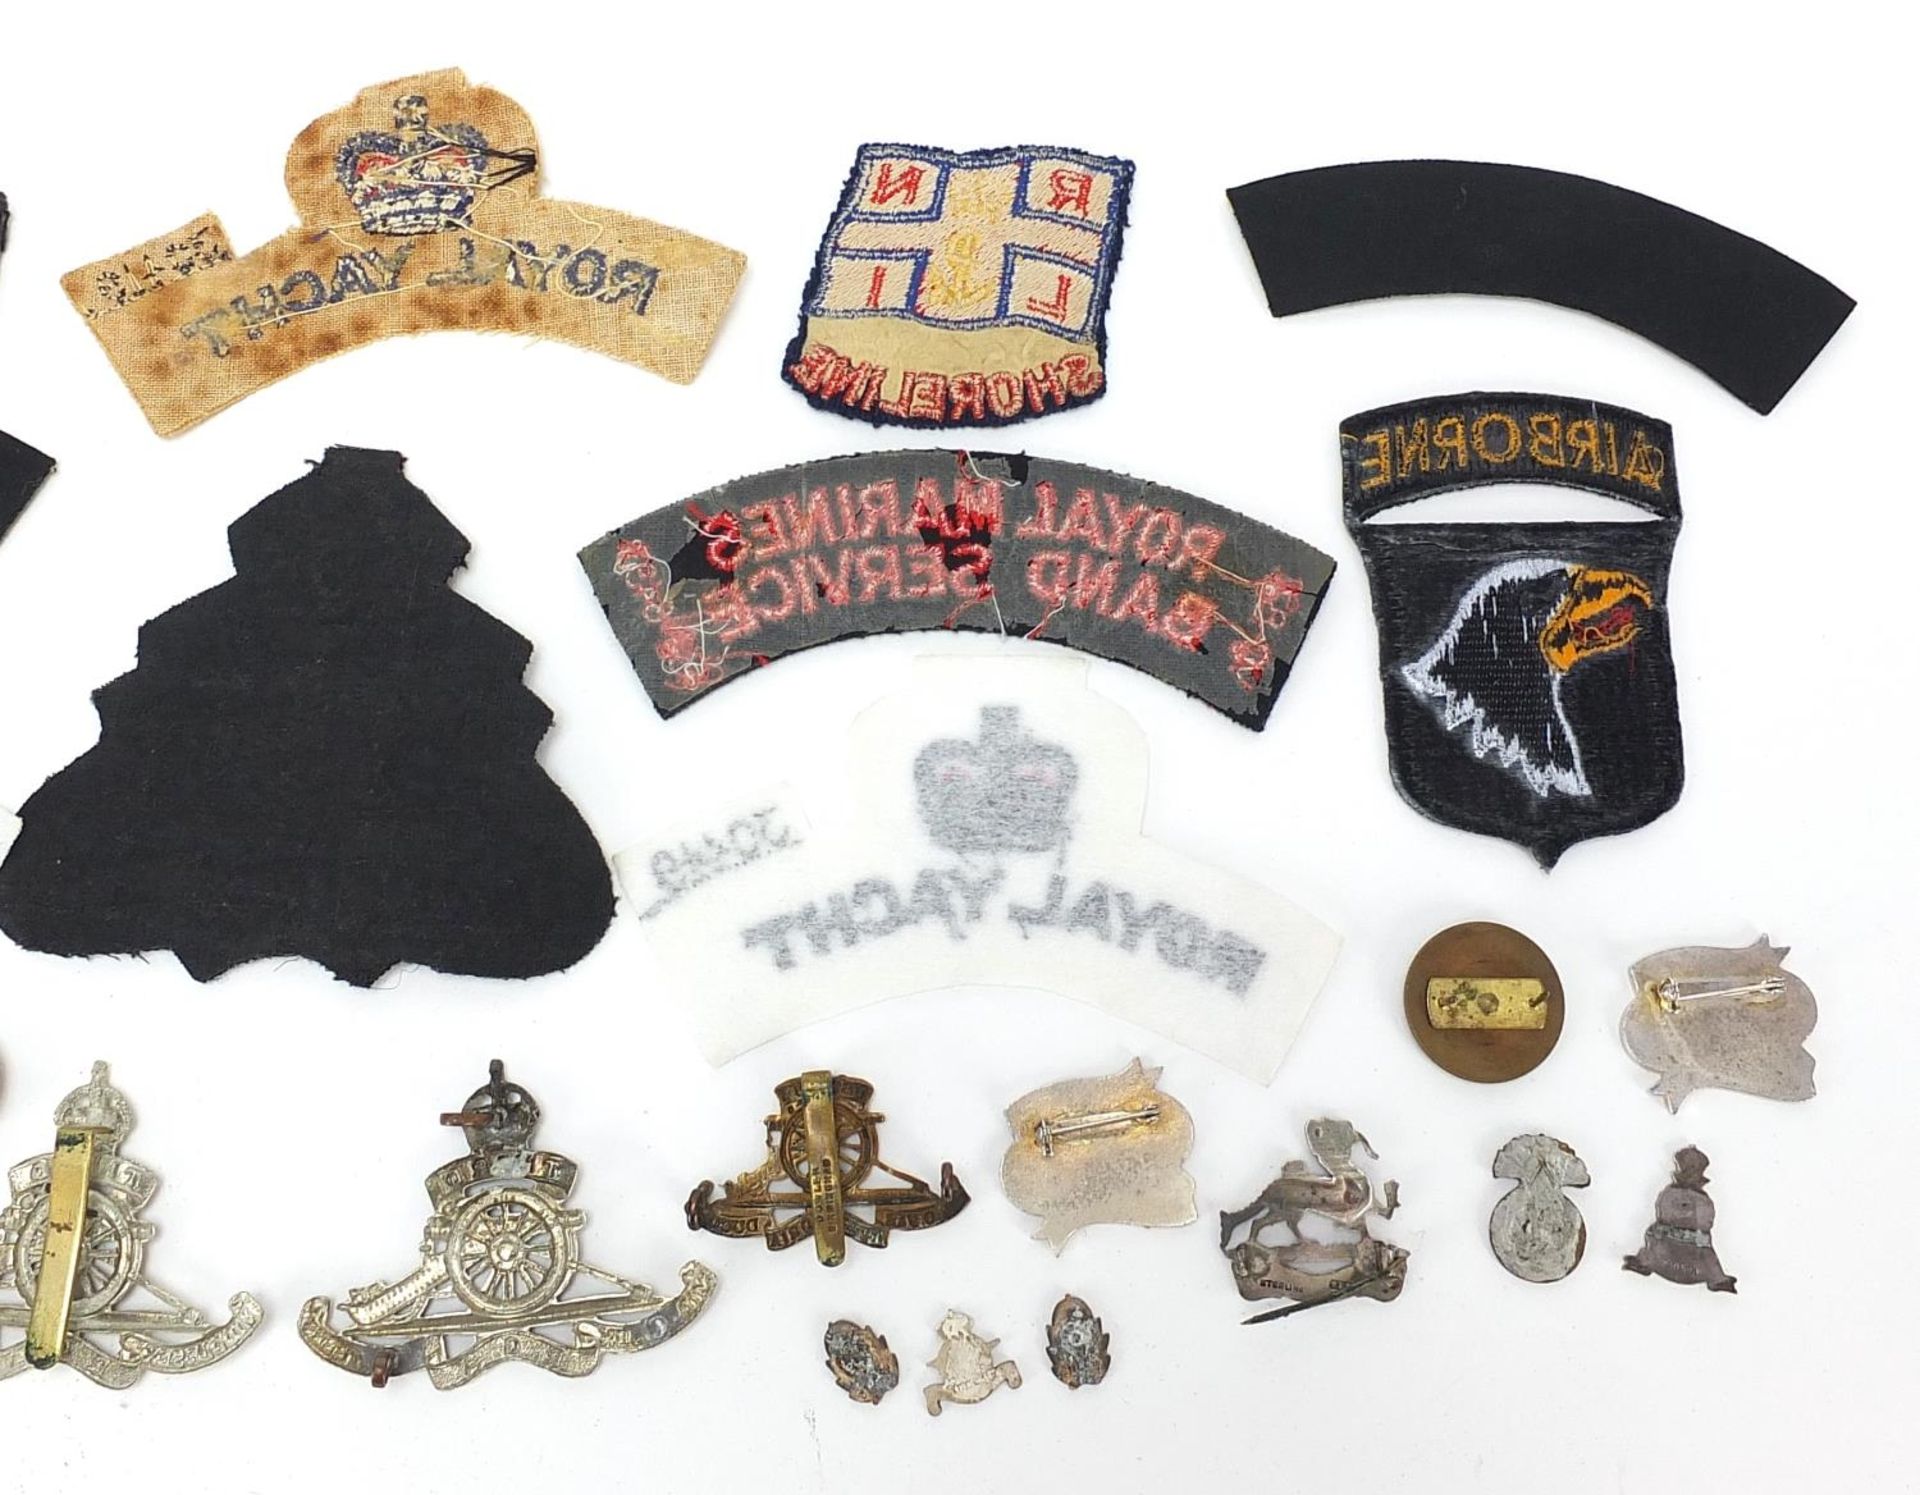 British military interest cloth patches and badges, some silver and enamel including Royal Artillery - Image 6 of 6